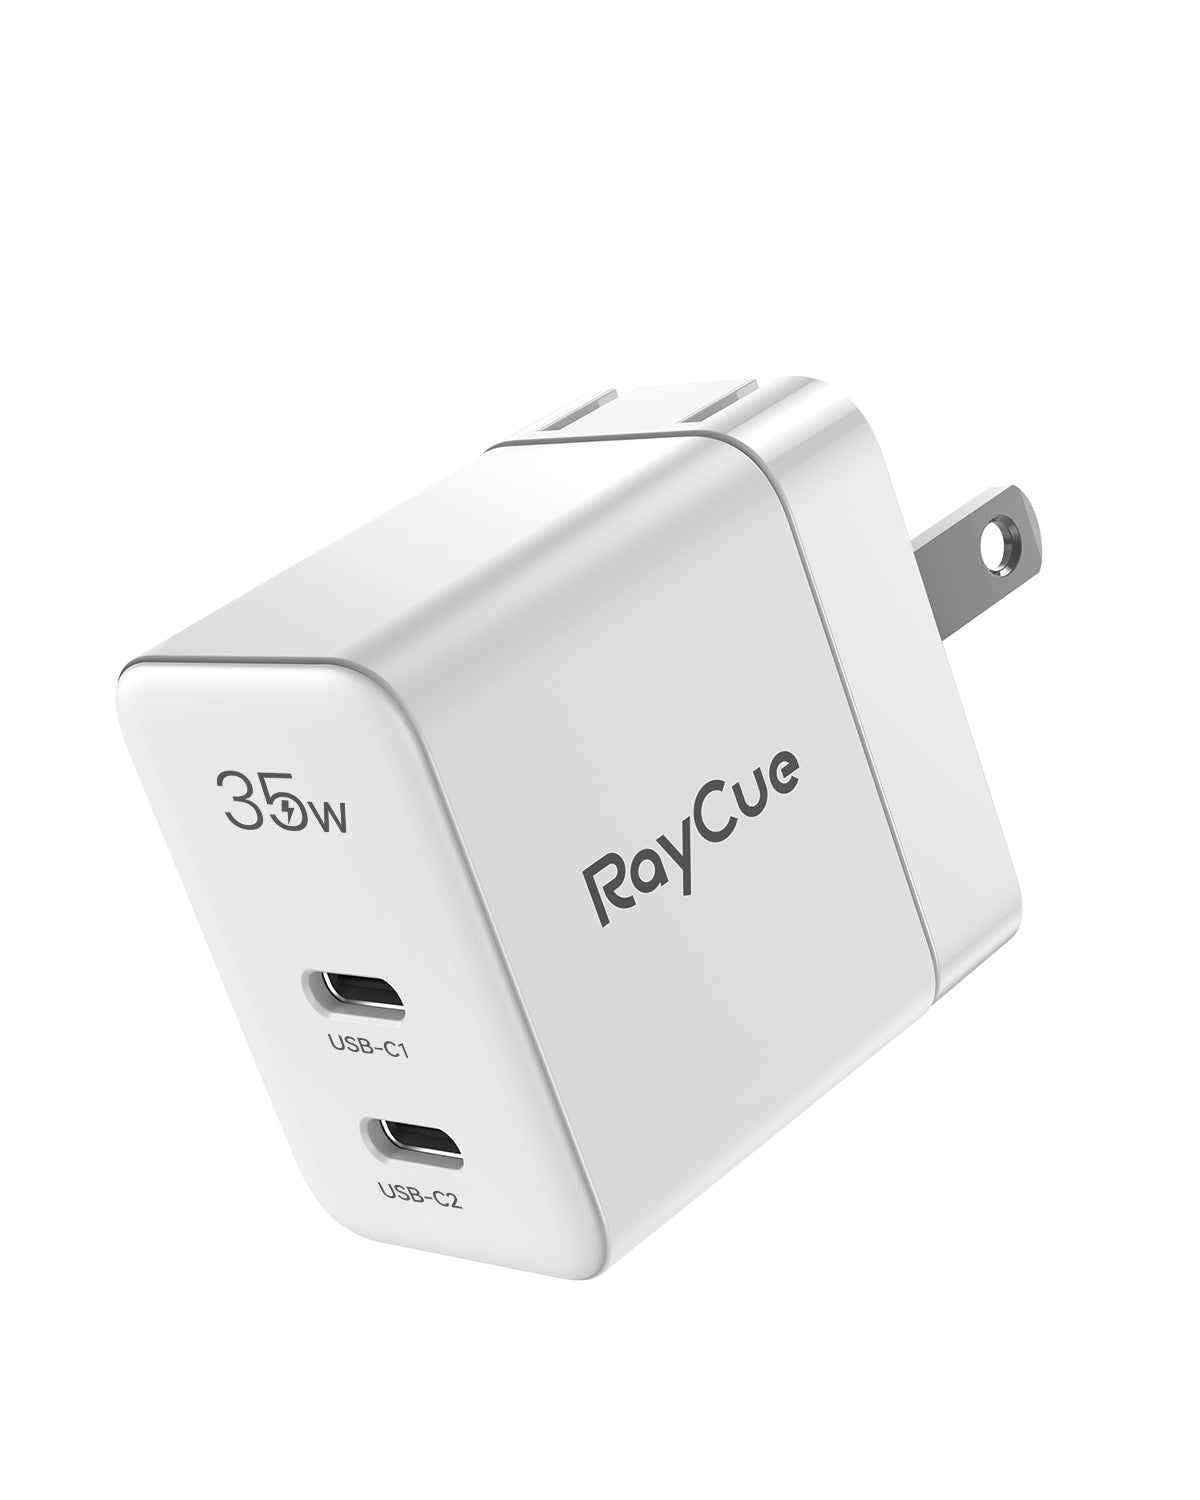 RayCue BlitzCharge GaN 35W 2-Port USB PD Charger for MacBook, iPhone, iPad